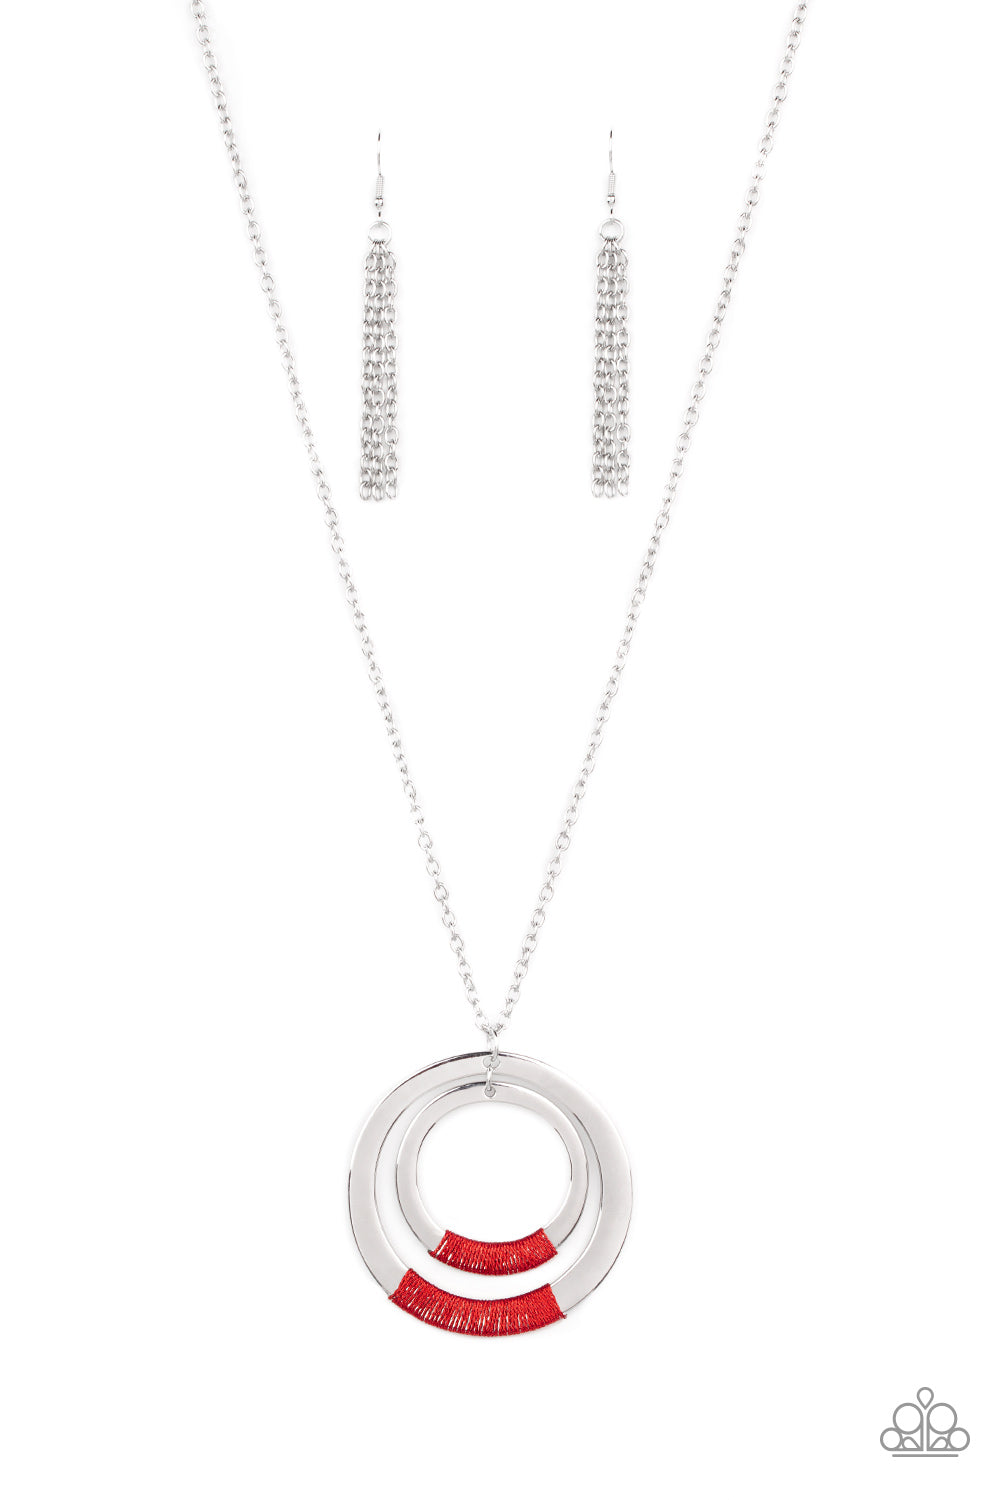 Authentic Attitude Necklace by Paparazzi Accessories